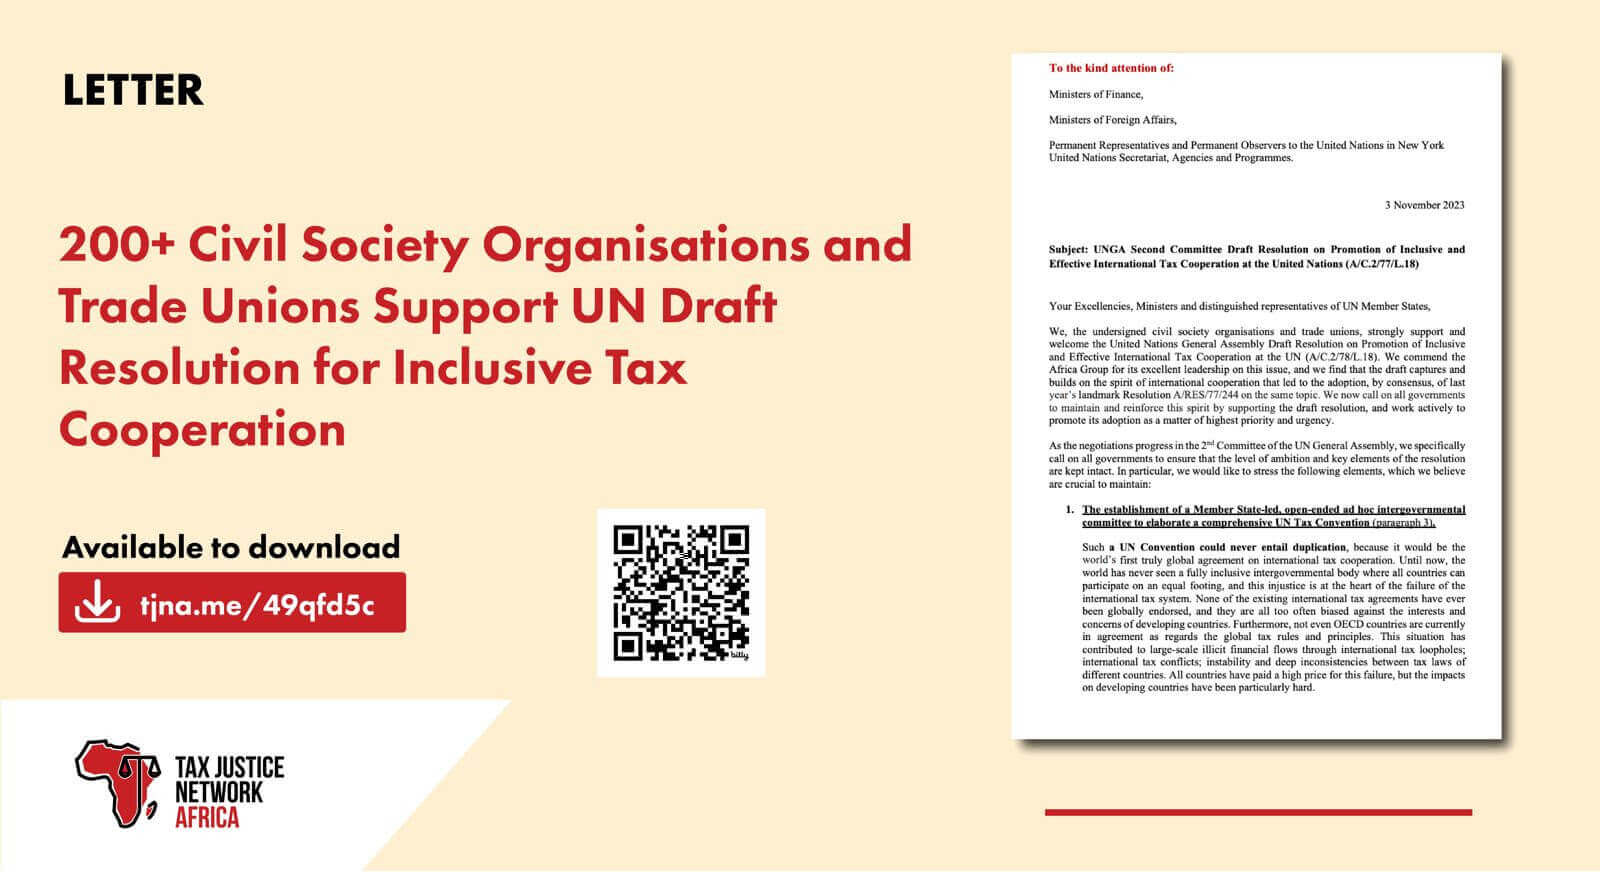 Over 200 CSOs and Trade Unions support UN Draft Resolution for Inclusive Tax Cooperation